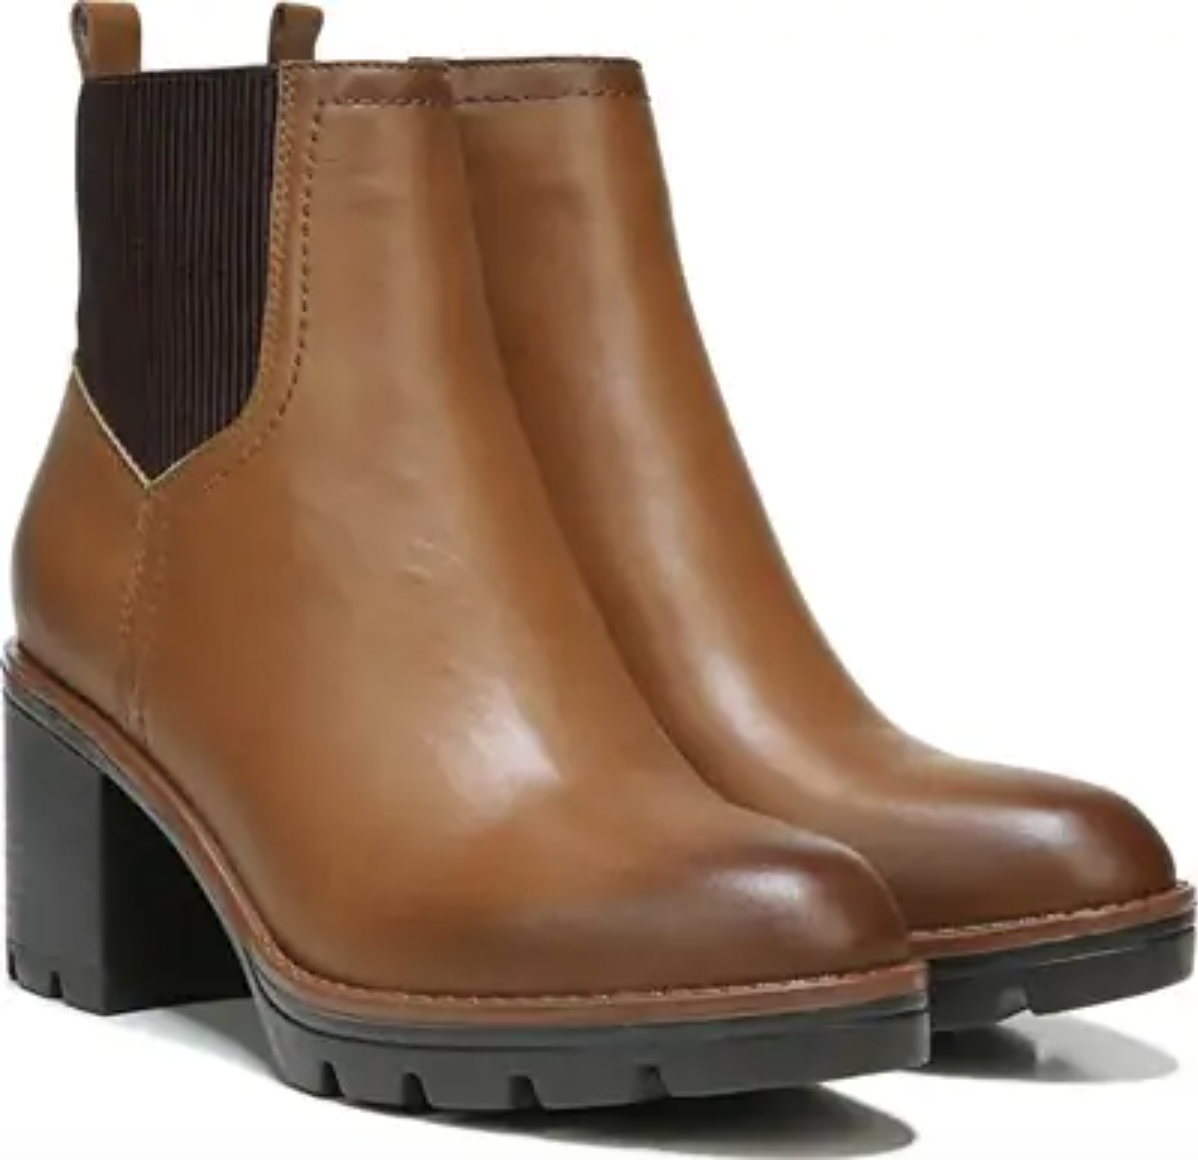 ankle boots with lug sole and heel 